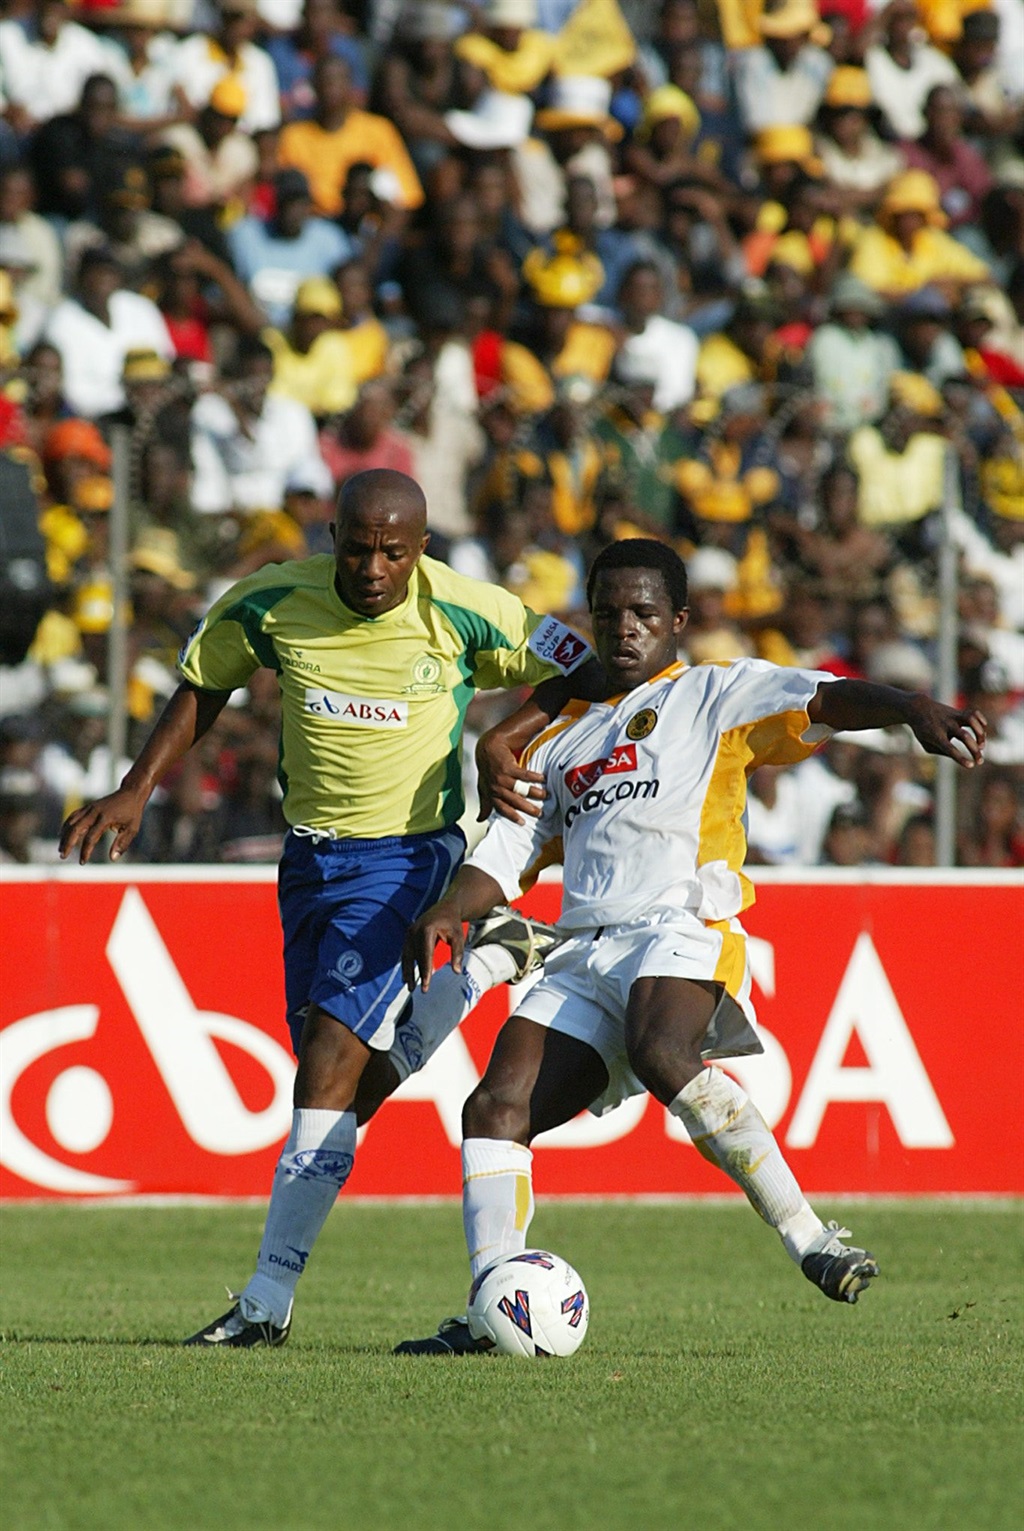 29 February 2004 , Tinashe Nengomasha and Isaac Shai during the ABSA Cup match between Sundowns and Kaizer Chiefs at the ODI Stadium in Mabopane